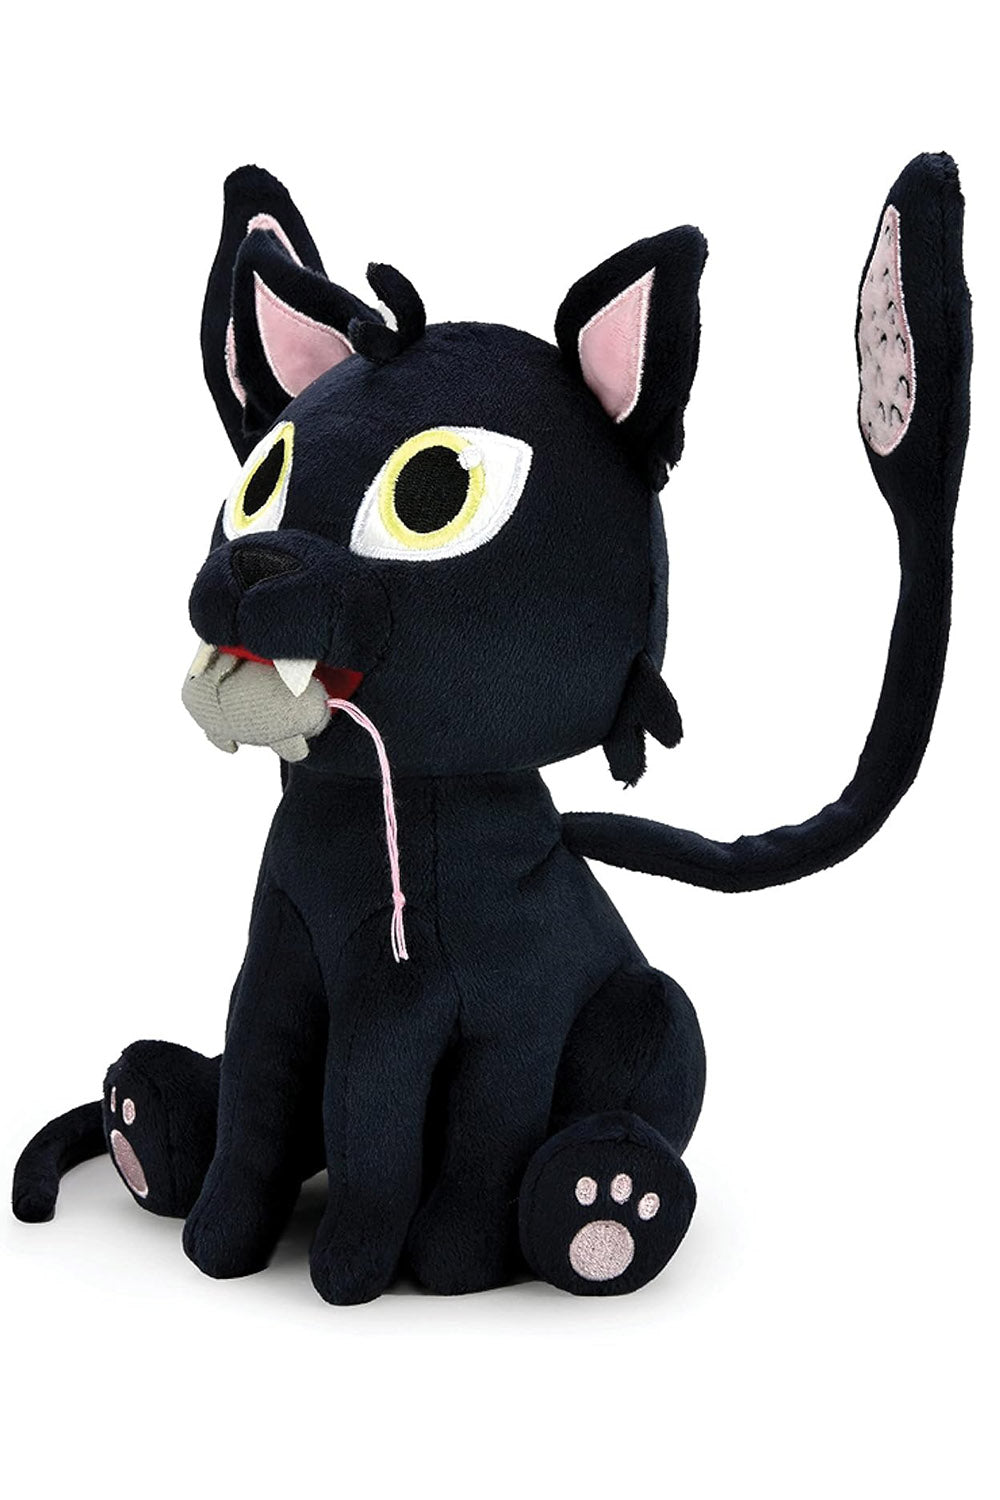 black dungeons and dragons tentacle cat plush